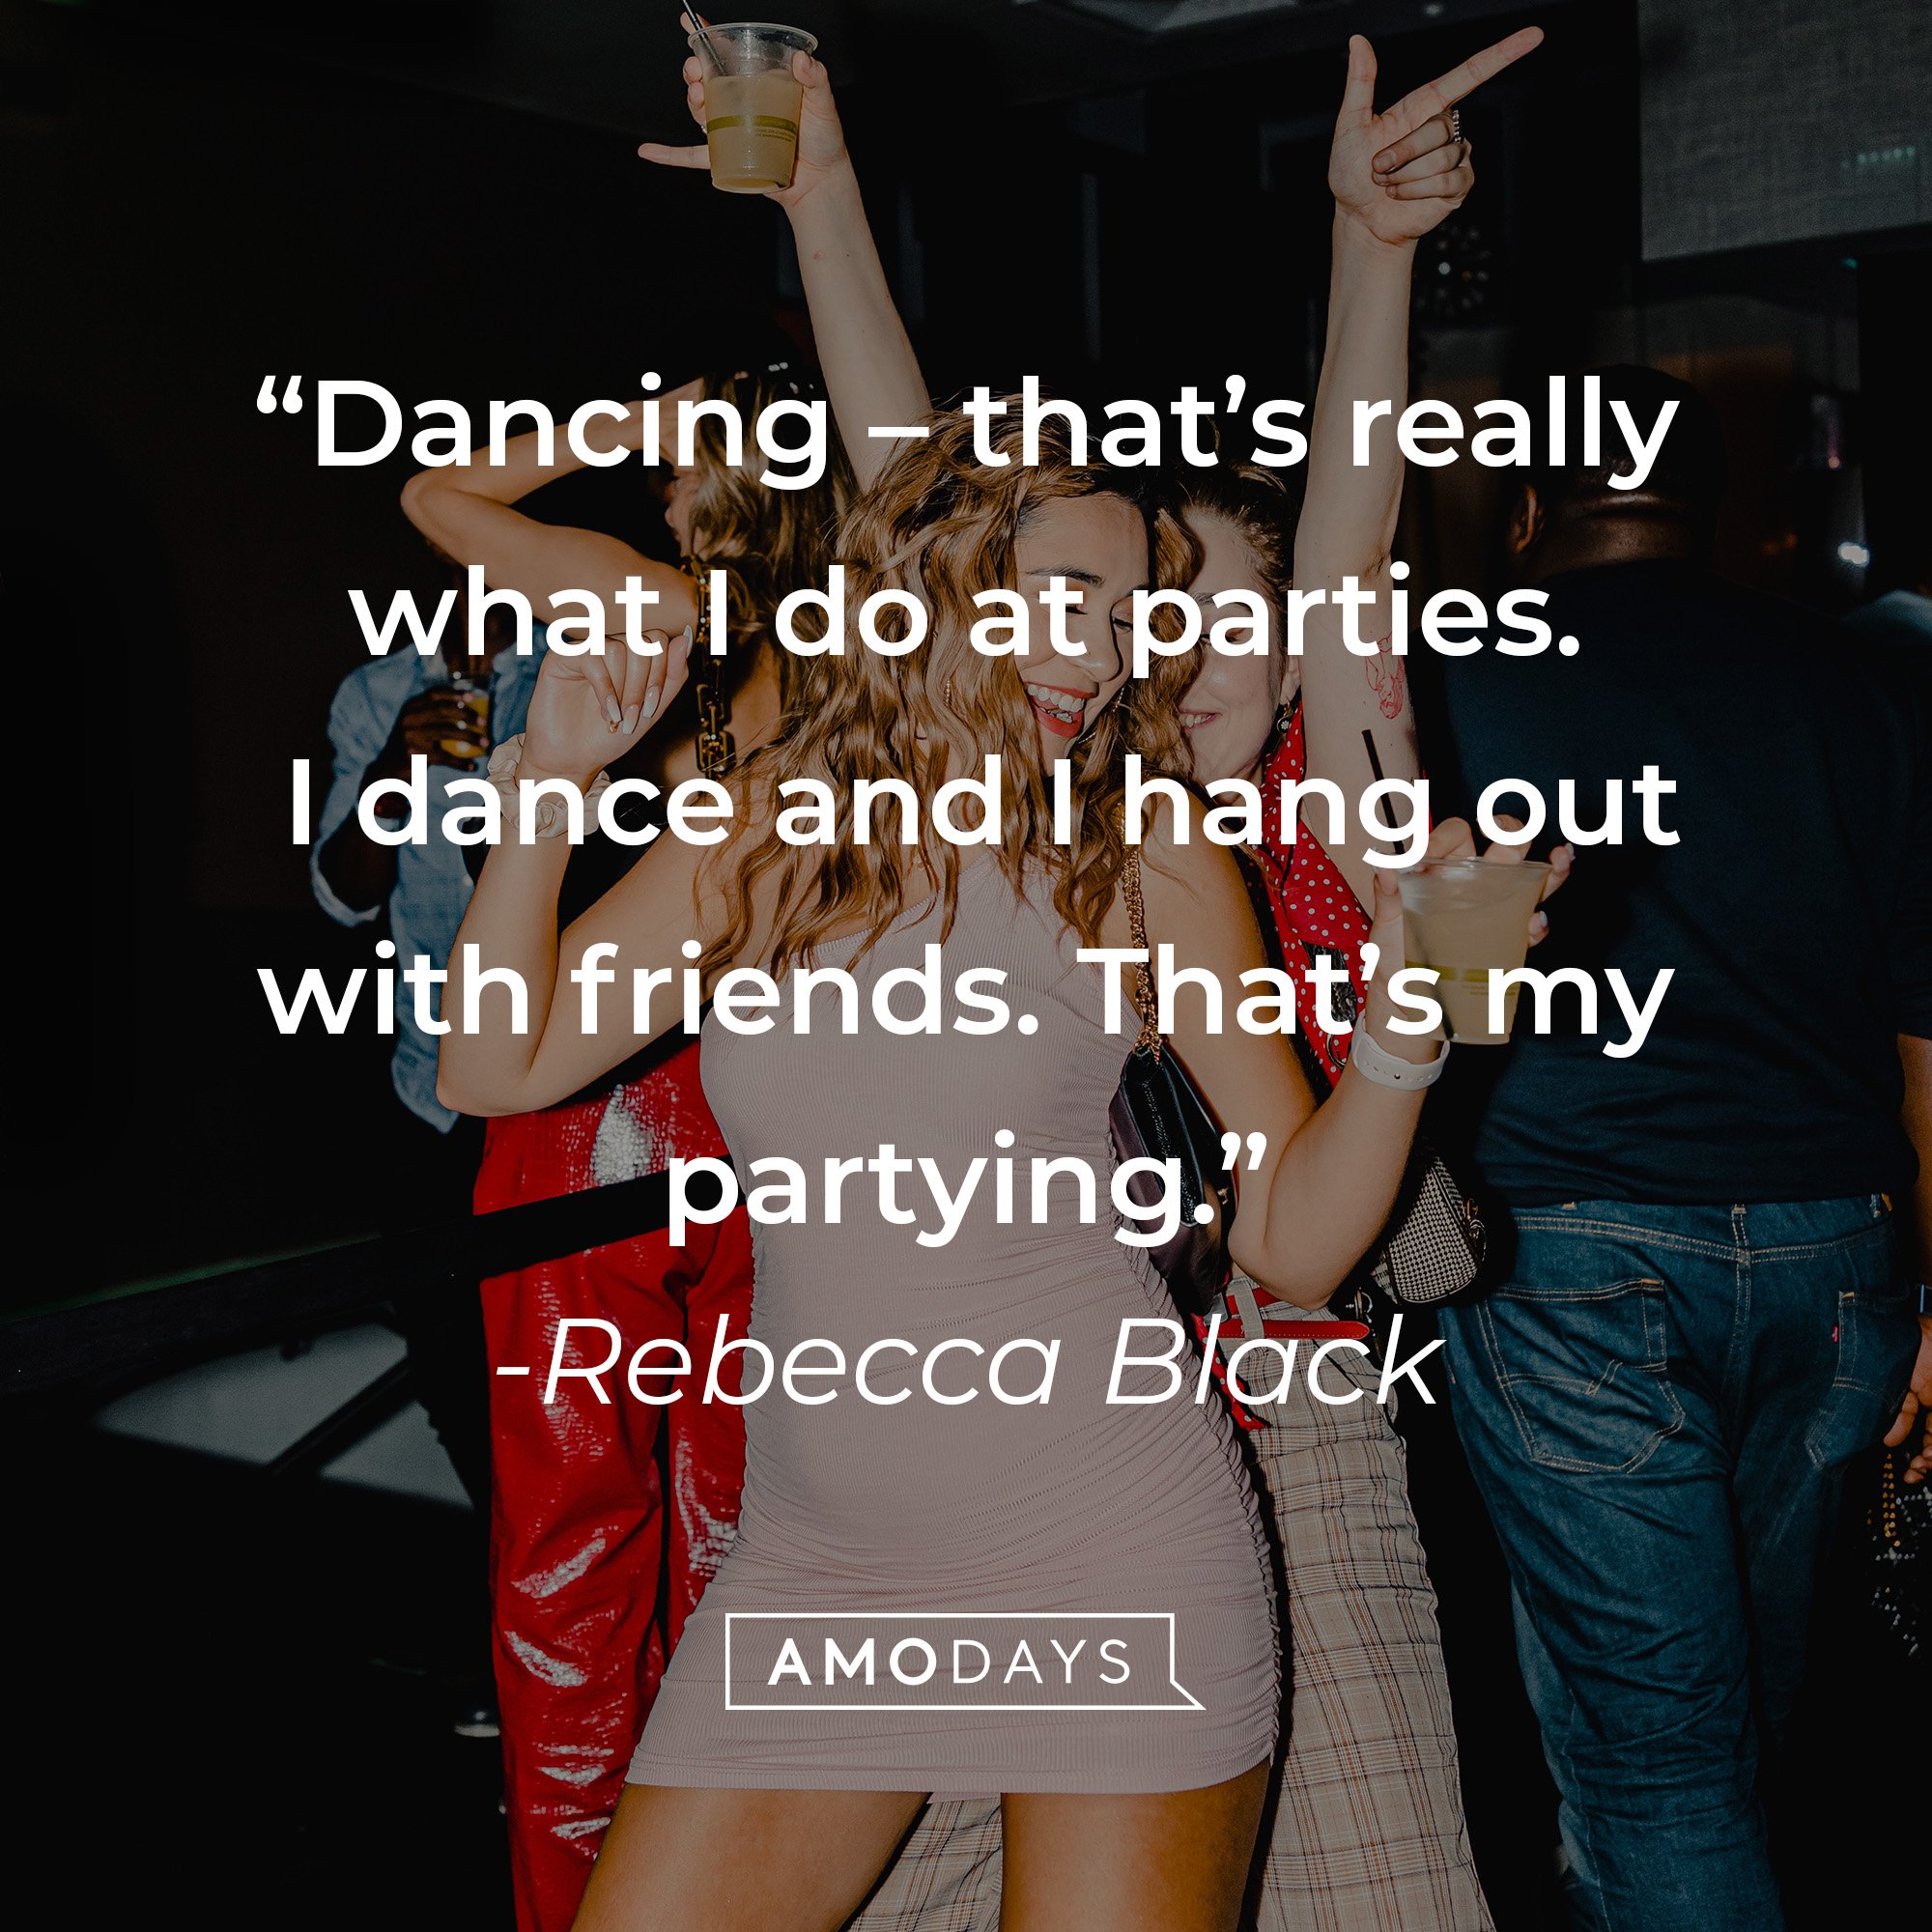 Rebecca Black's quote: "Dancing - that's really what I do at parties. I dance and hang out with my friends. That's my partying" | Image: AmoDays 